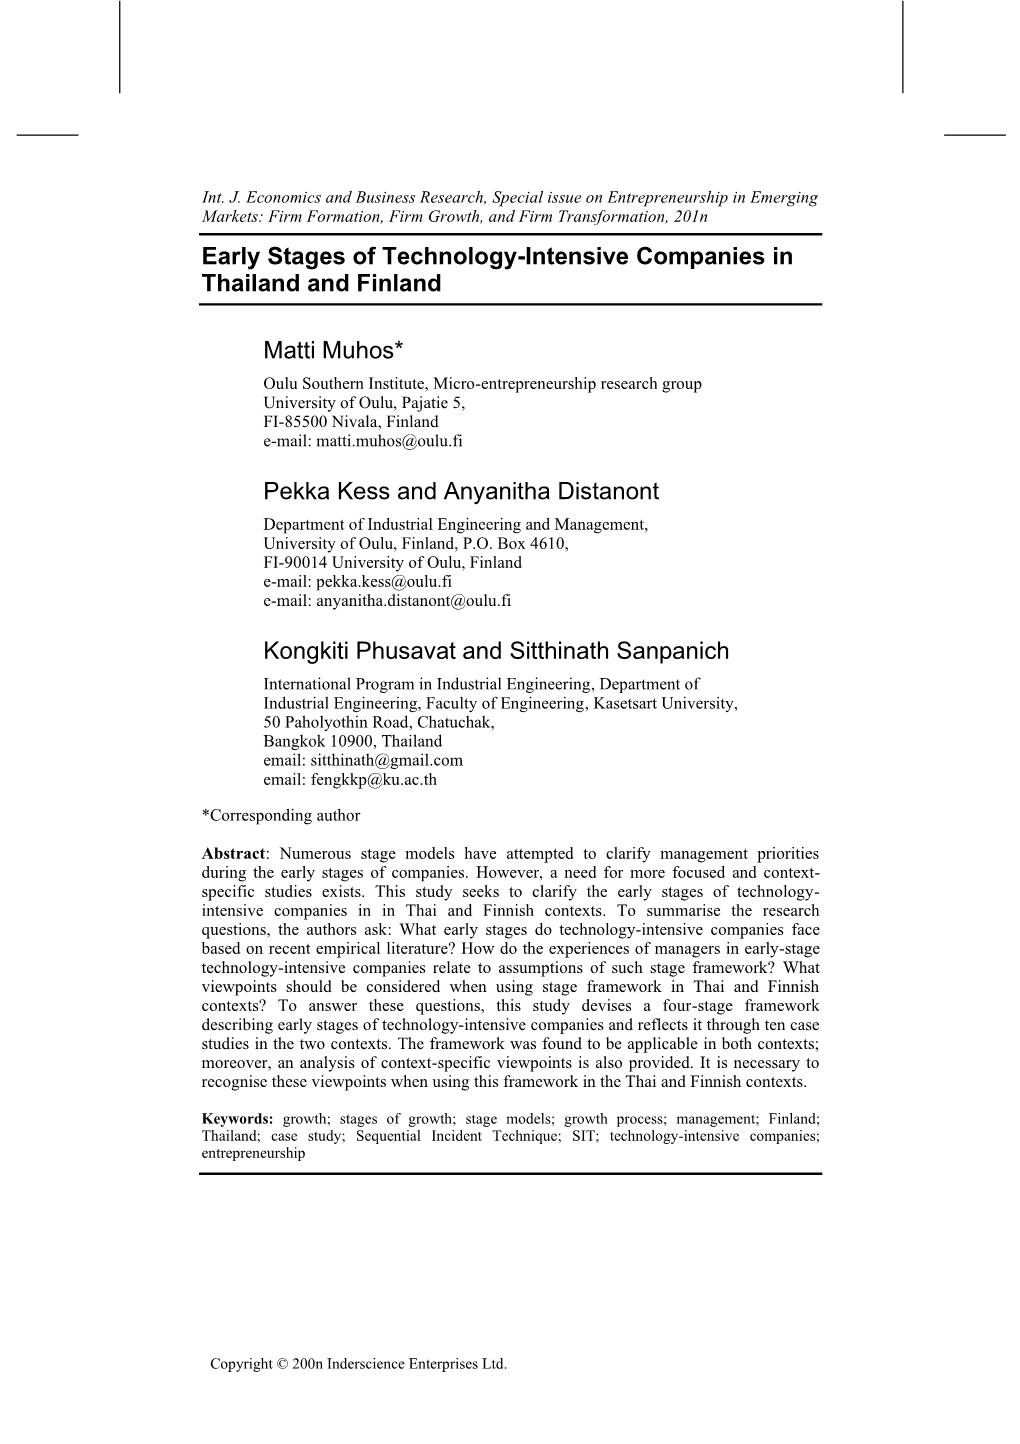 Early Stages of Technology-Intensive Companies in Thailand and Finland Matti Muhos* Pekka Kess and Anyanitha Distanont Kongkiti